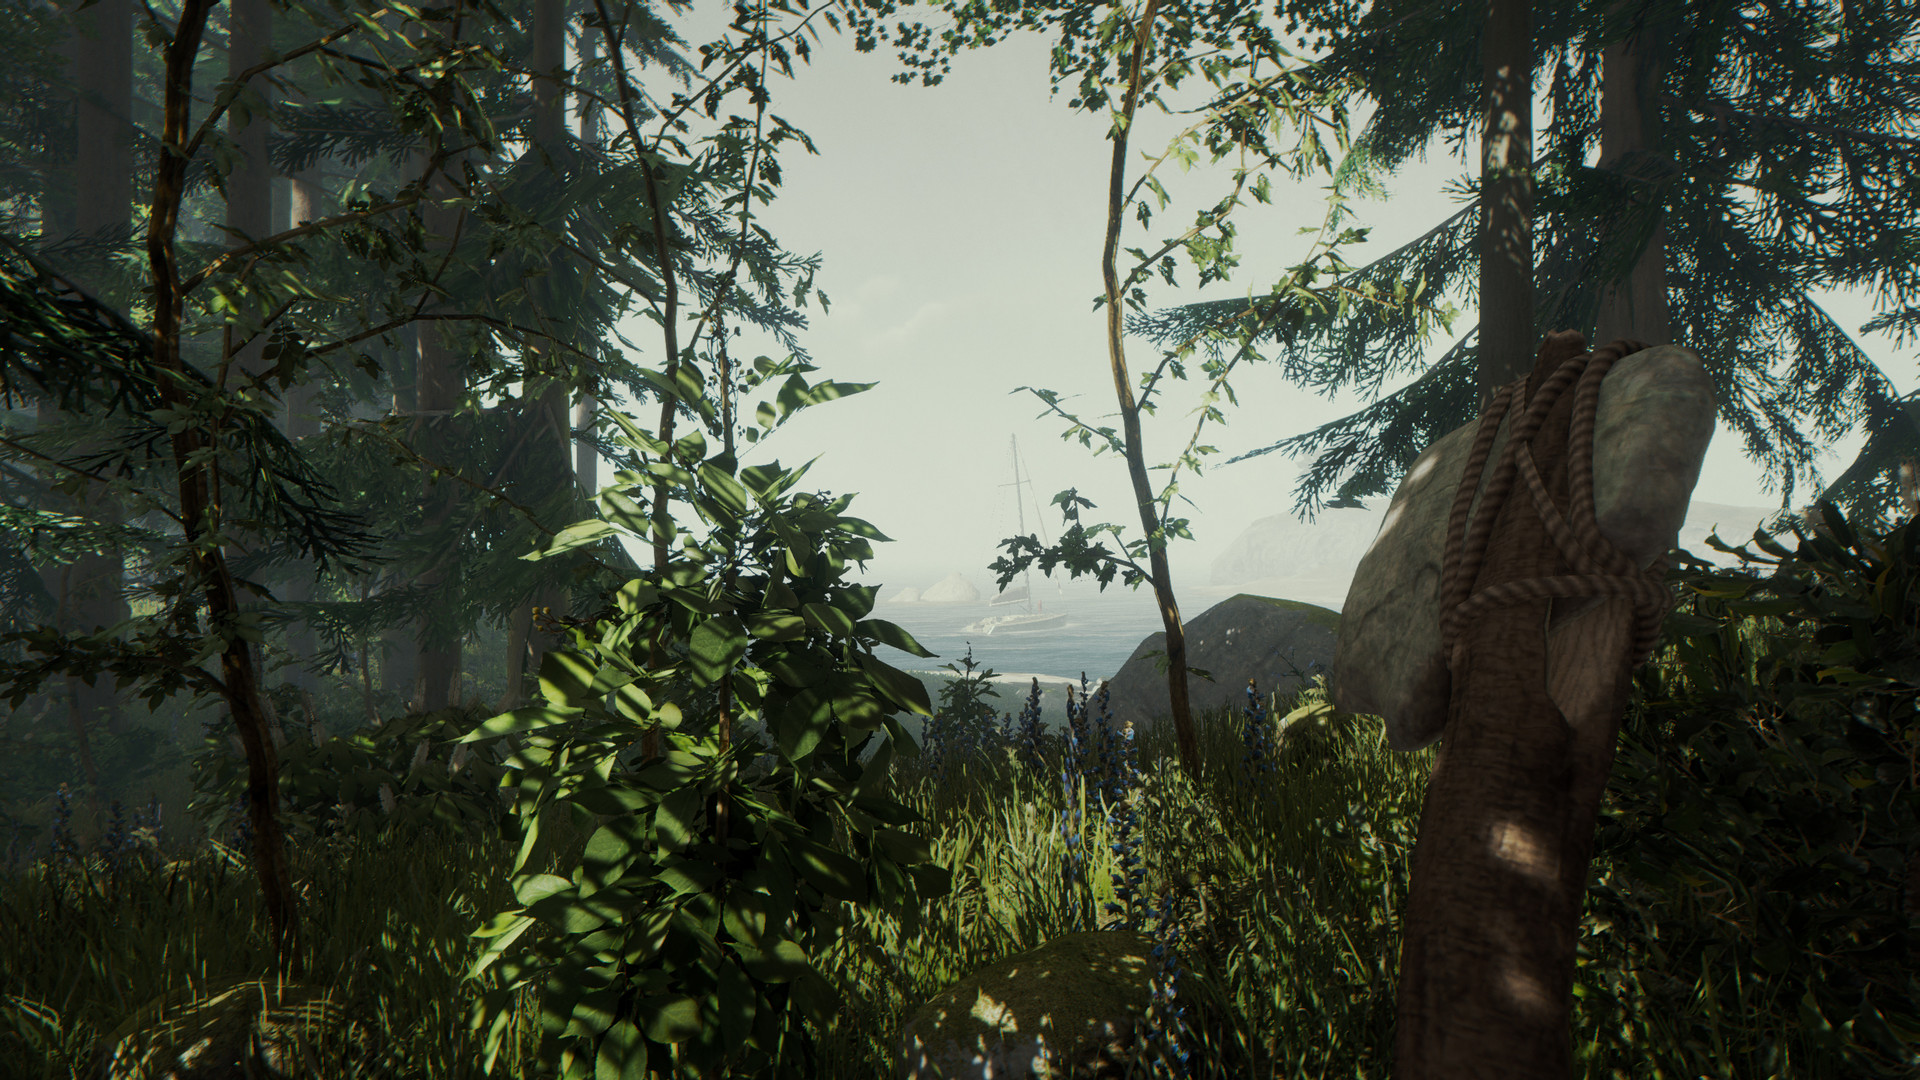 Sons of the Forest cheats and console commands